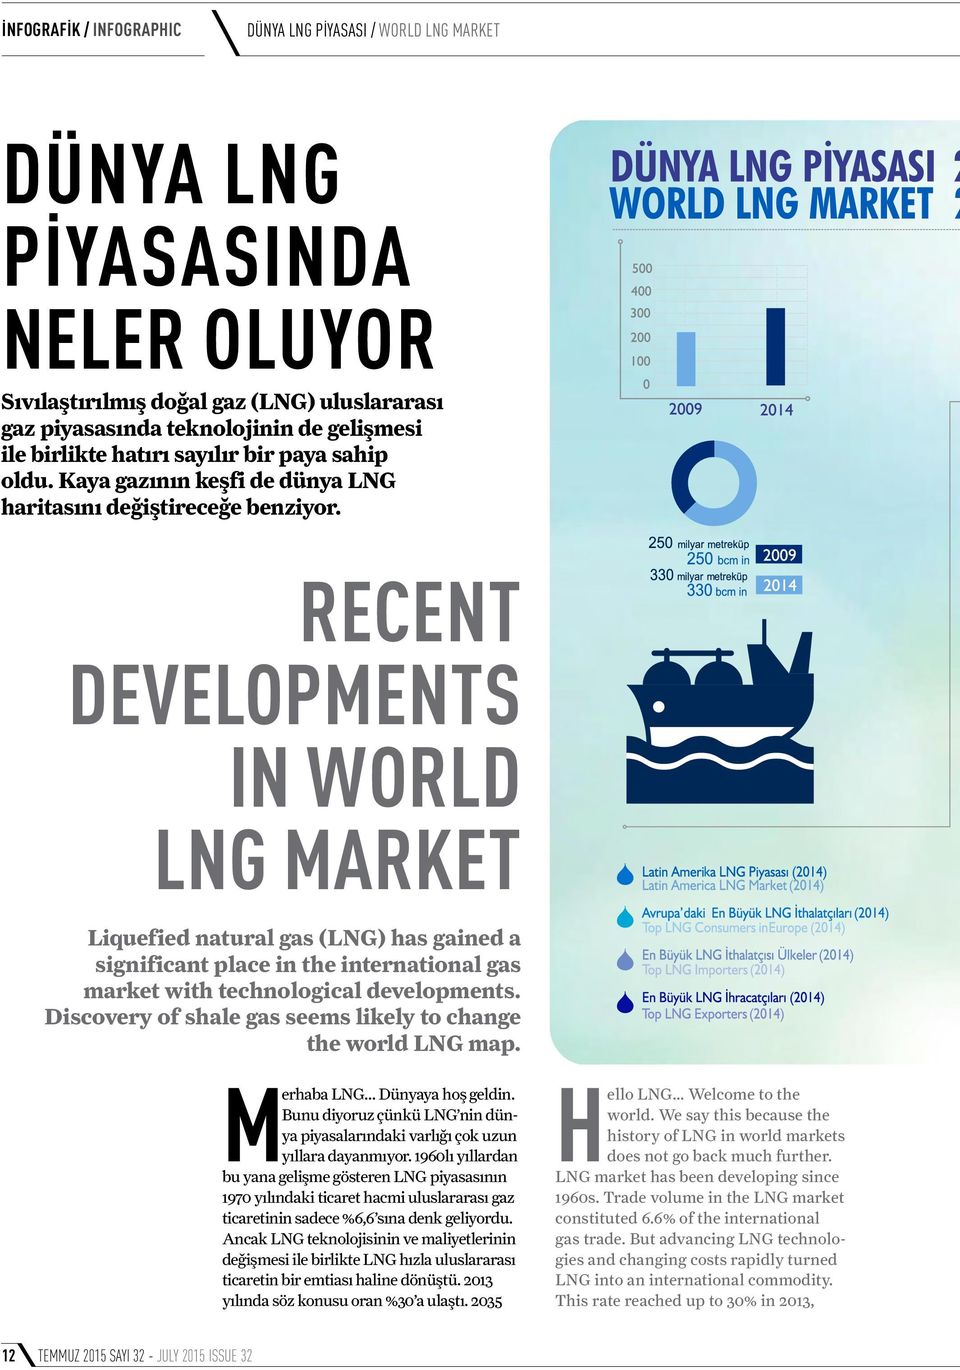 RECENT DEVELOPMENTS IN WORLD LNG MARKET Liquefied natural gas (LNG) has gained a significant place in the international gas market with technological developments.